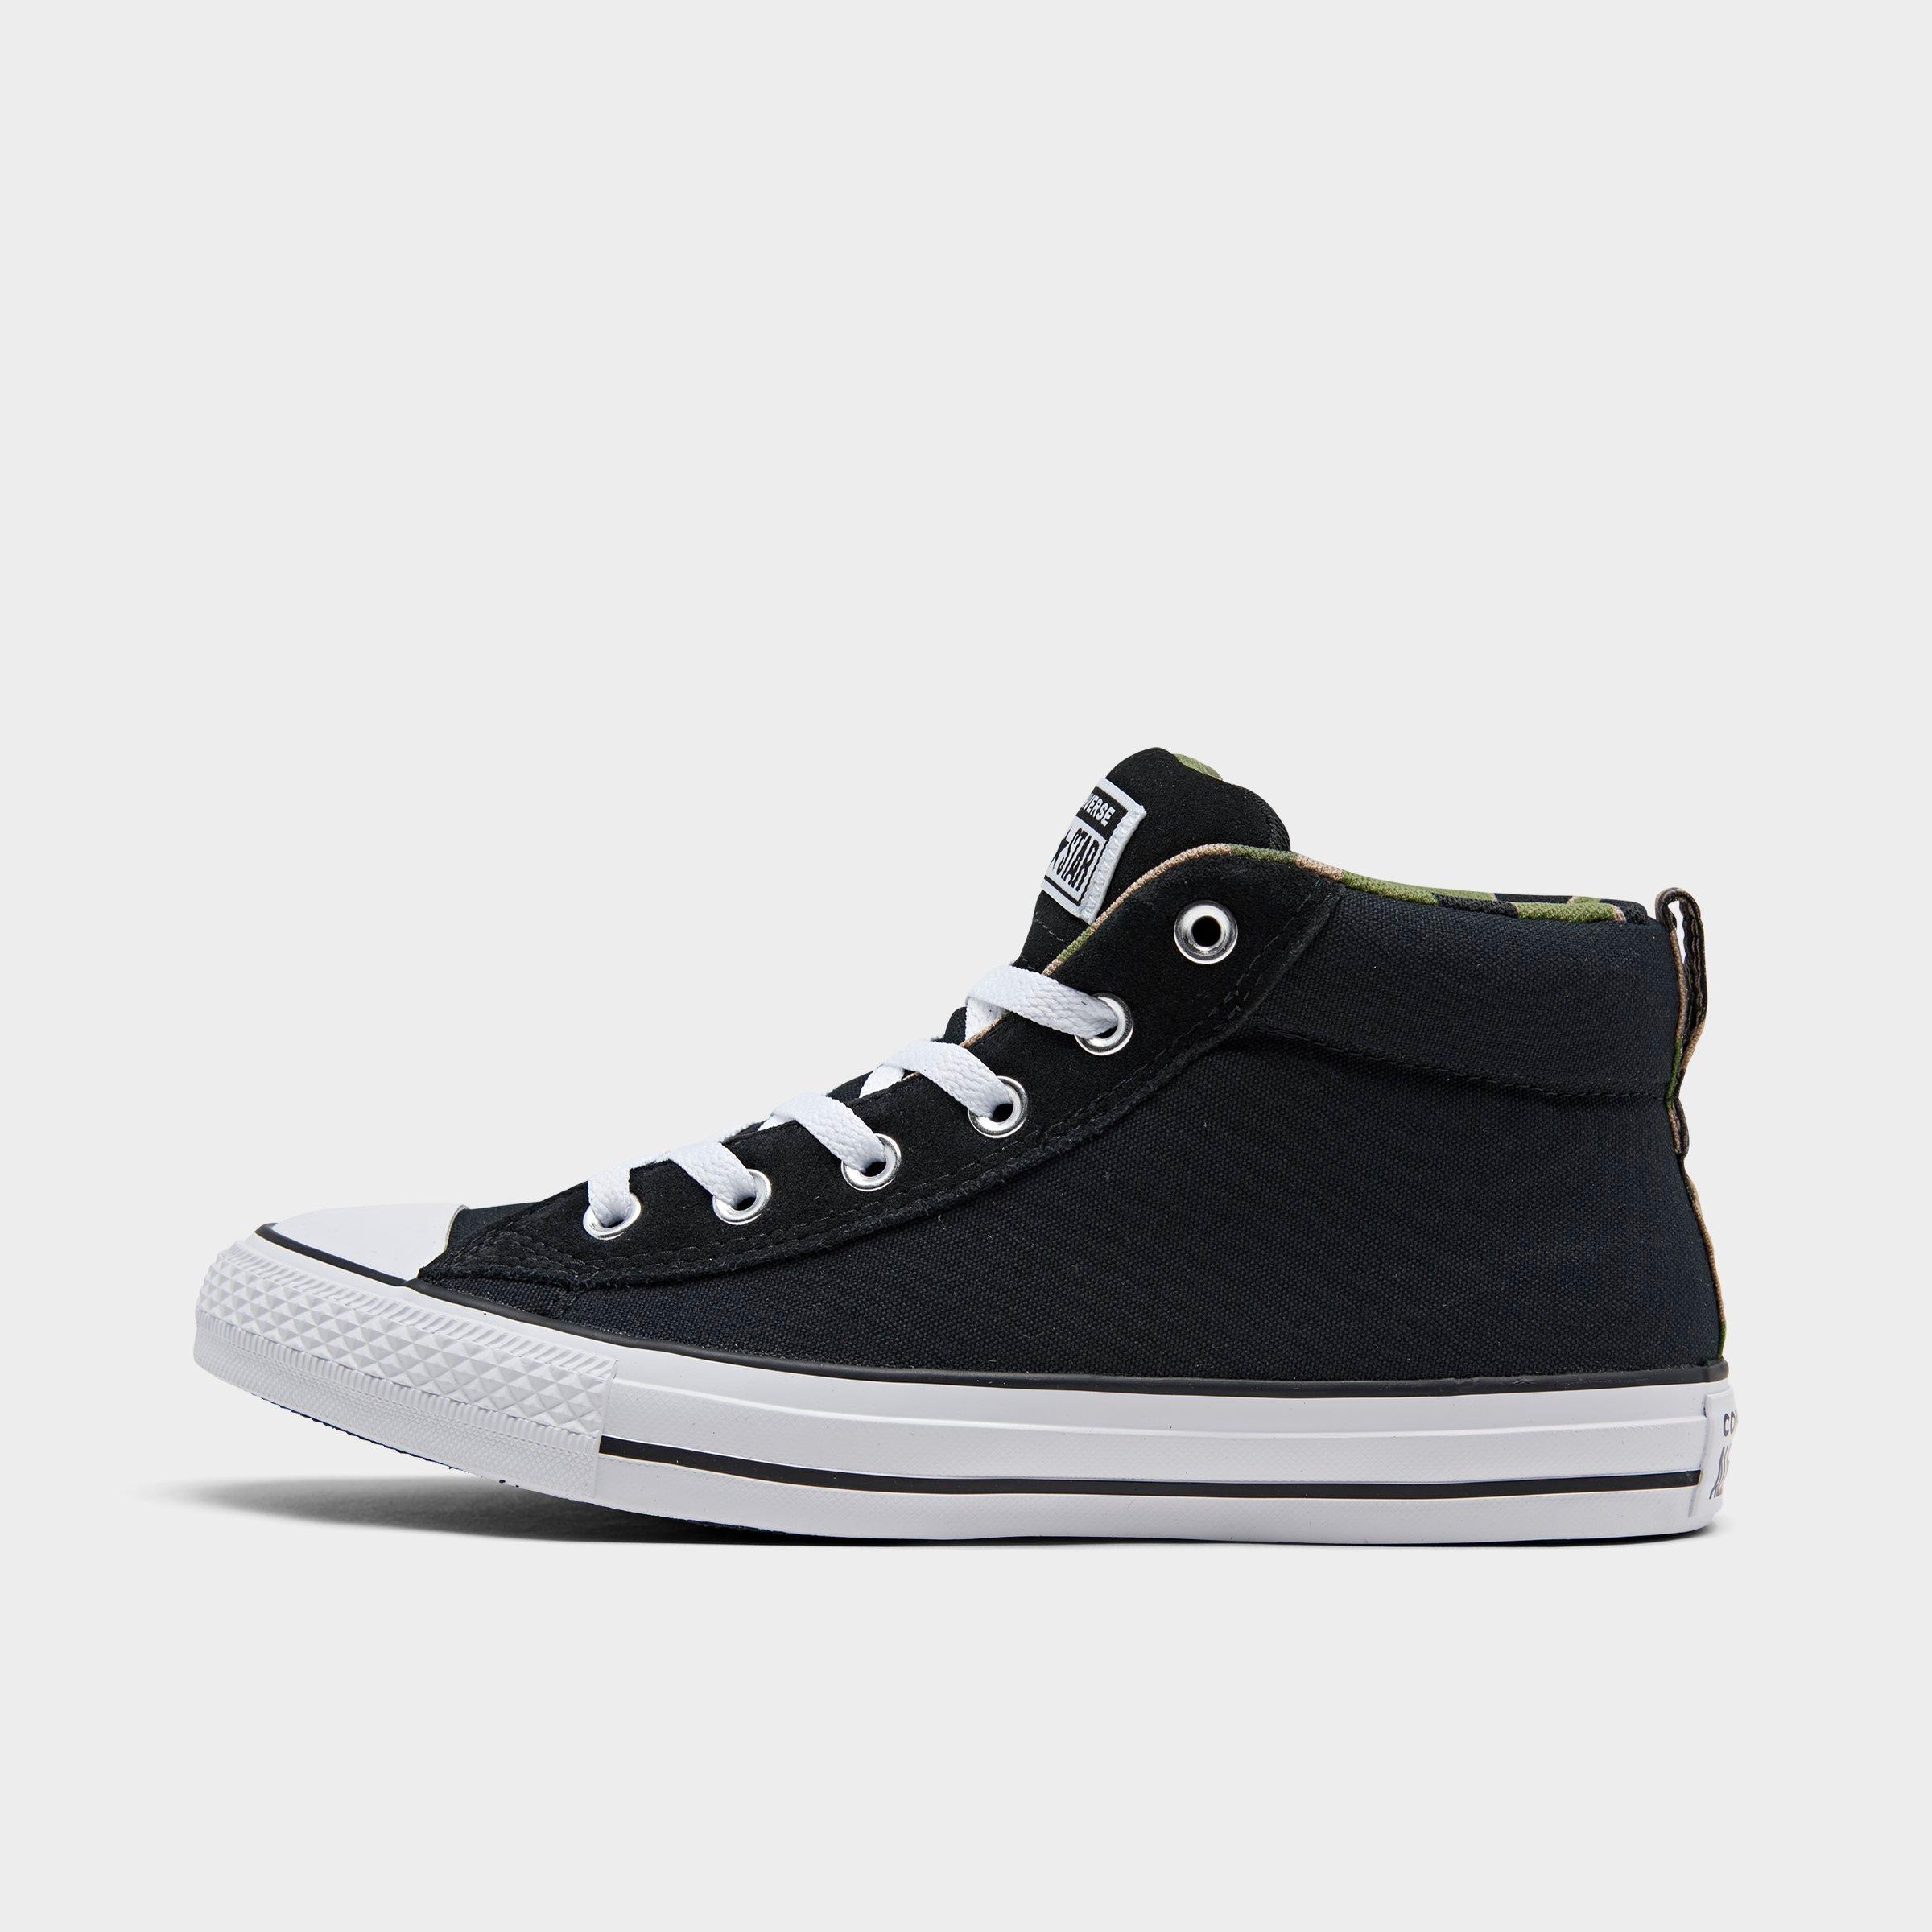 men's chuck taylor street mid casual sneakers